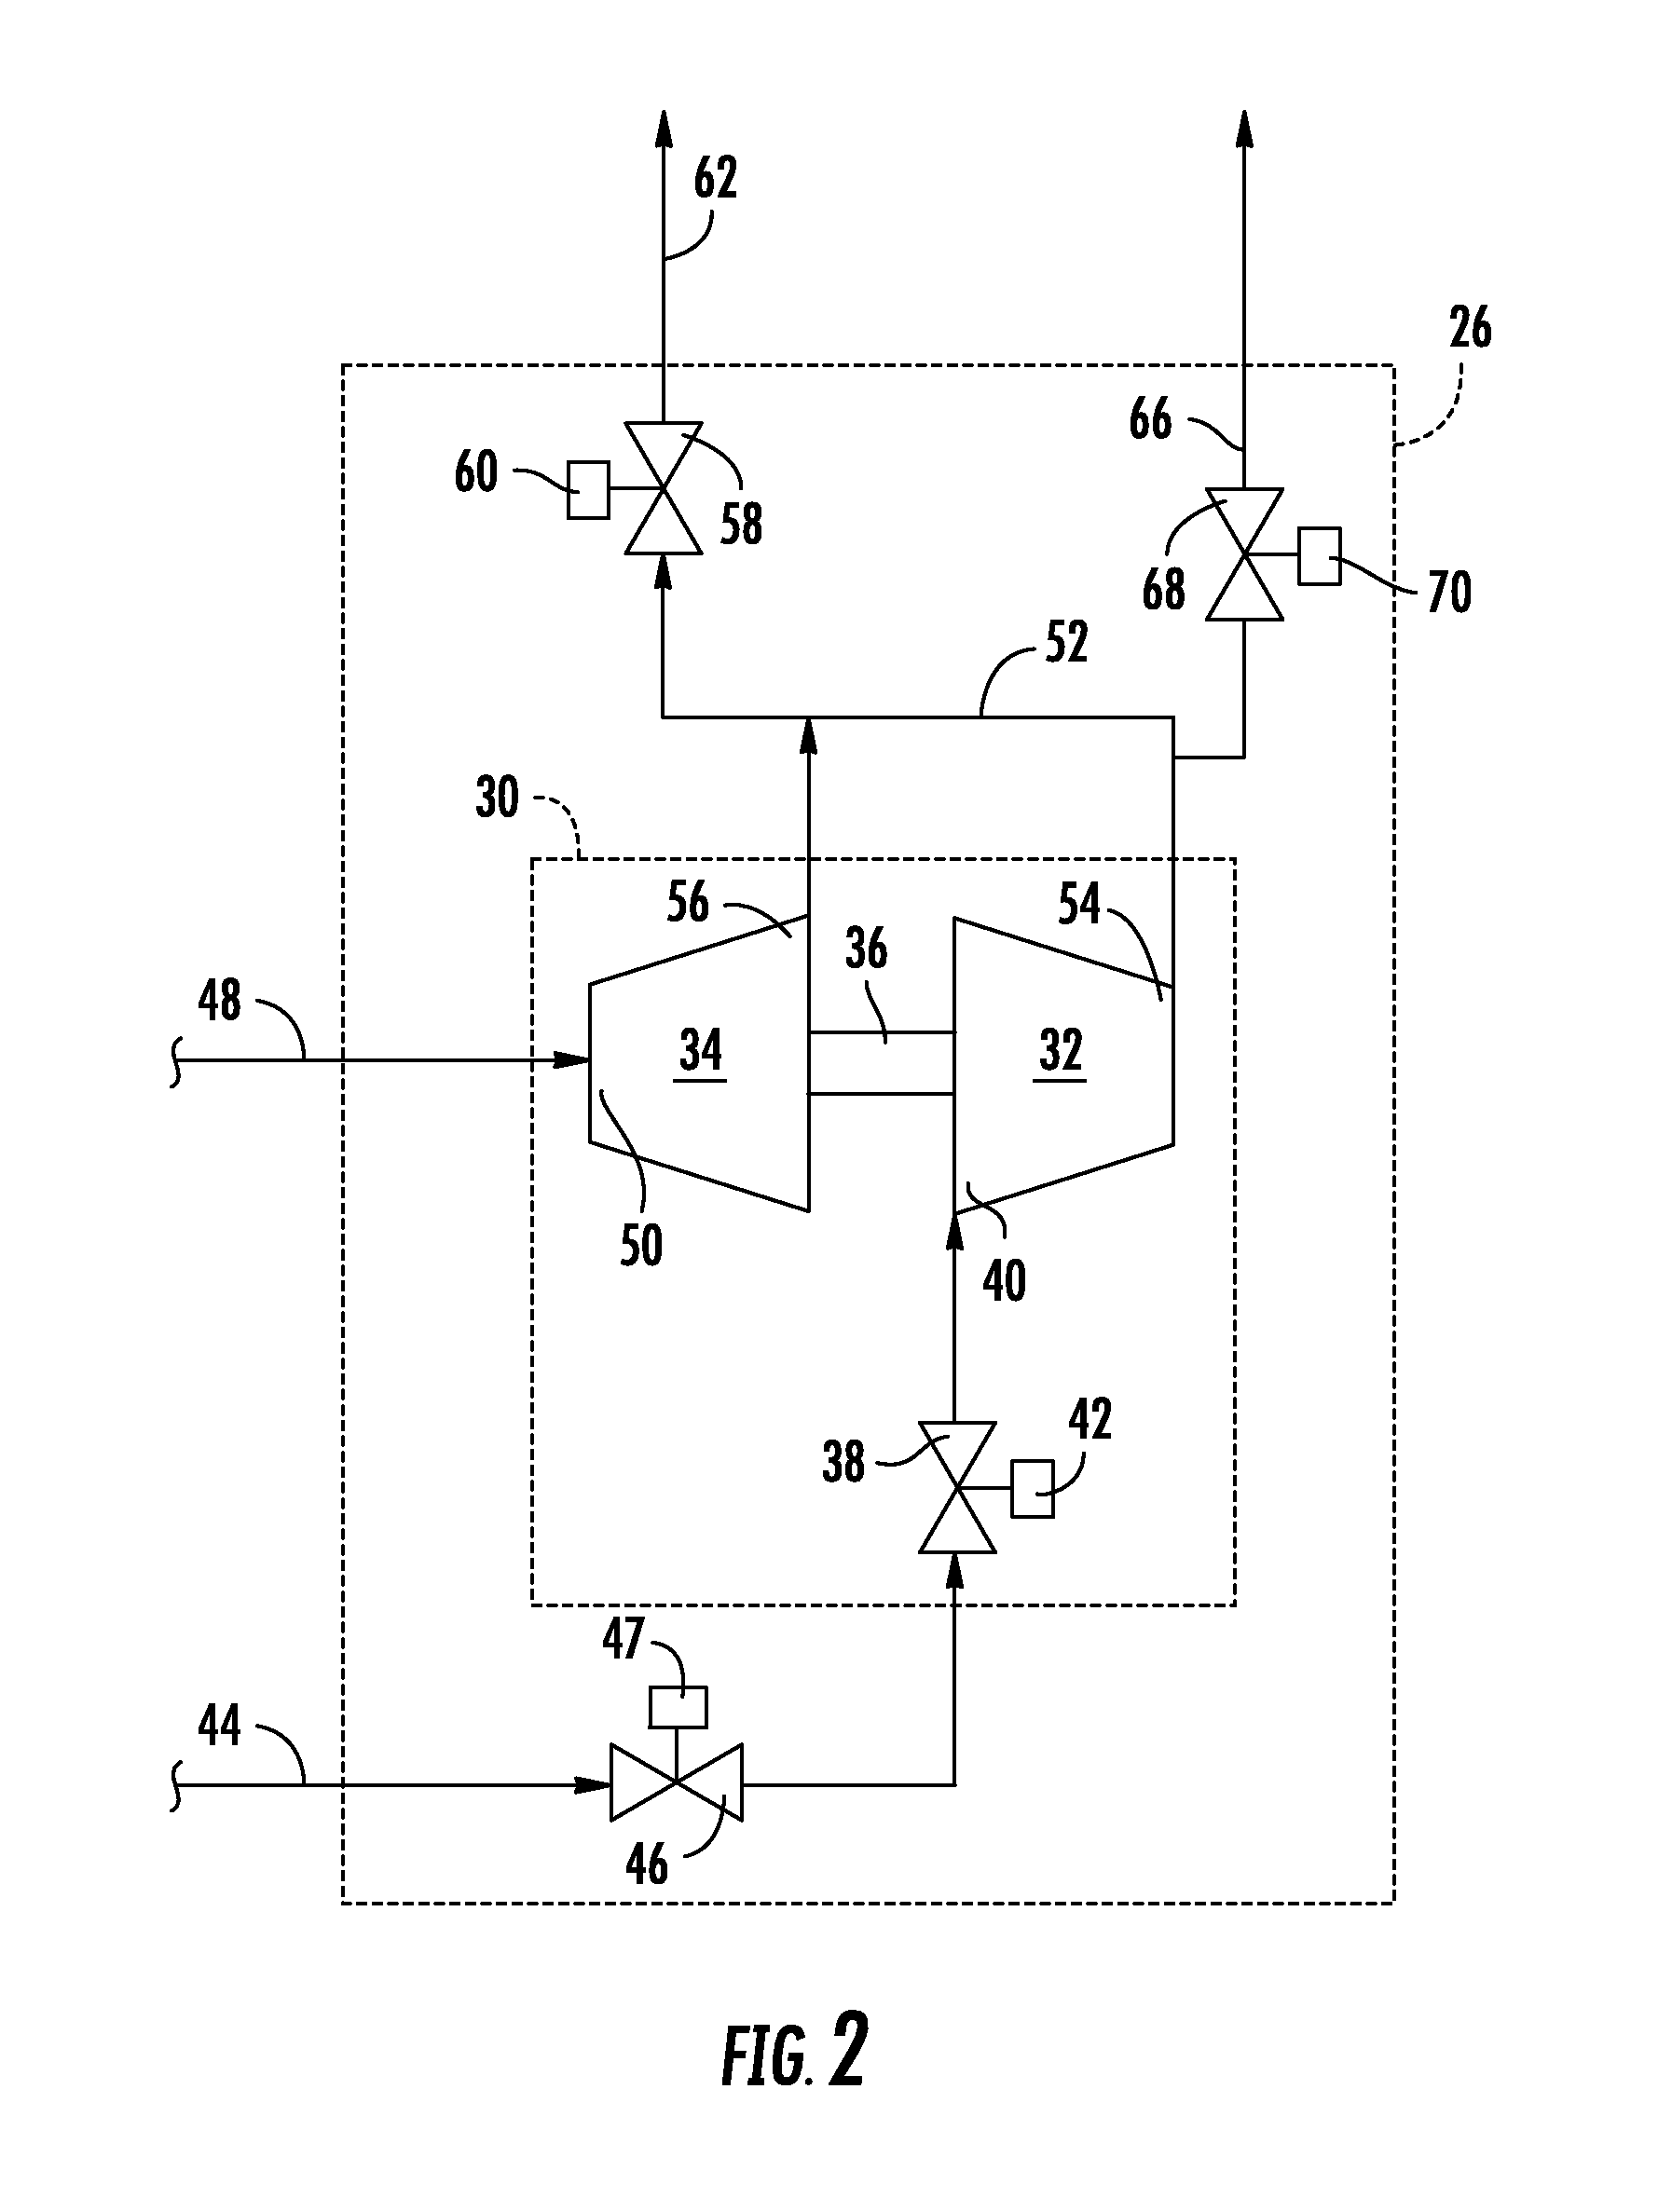 Turbine integrated bleed system and method for a gas turbine engine